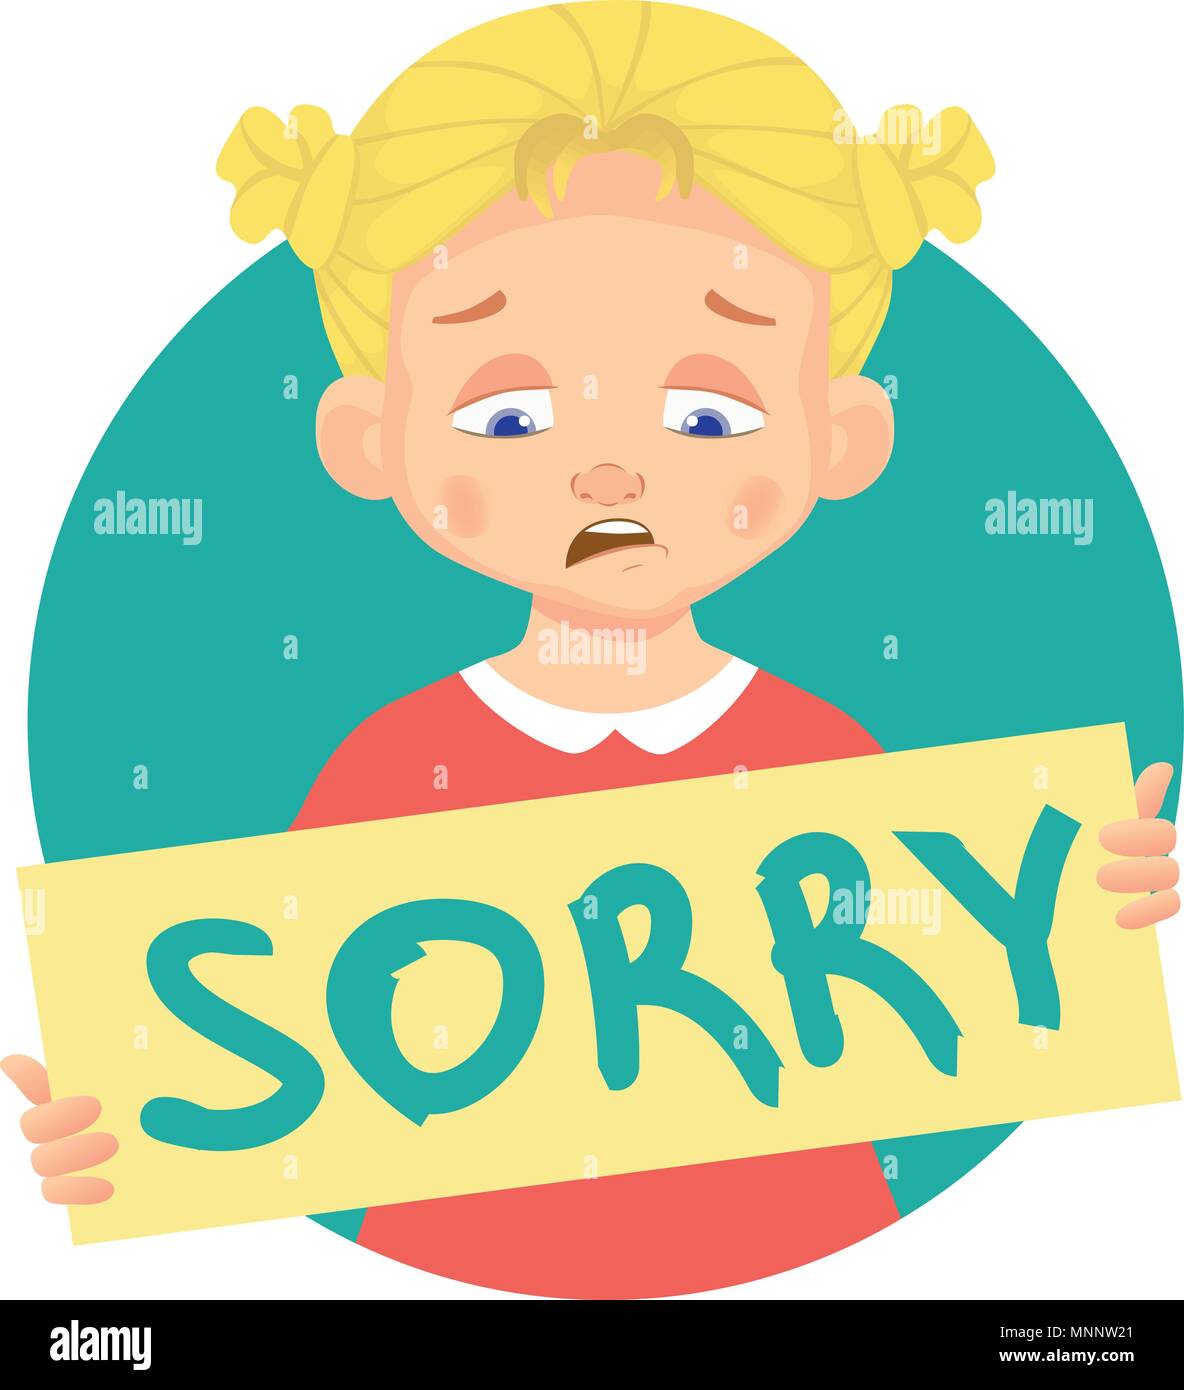 I am sorry message on white background. Sad girl holding poster with word Sorry. Conceptual handwritten message. Stock Vector